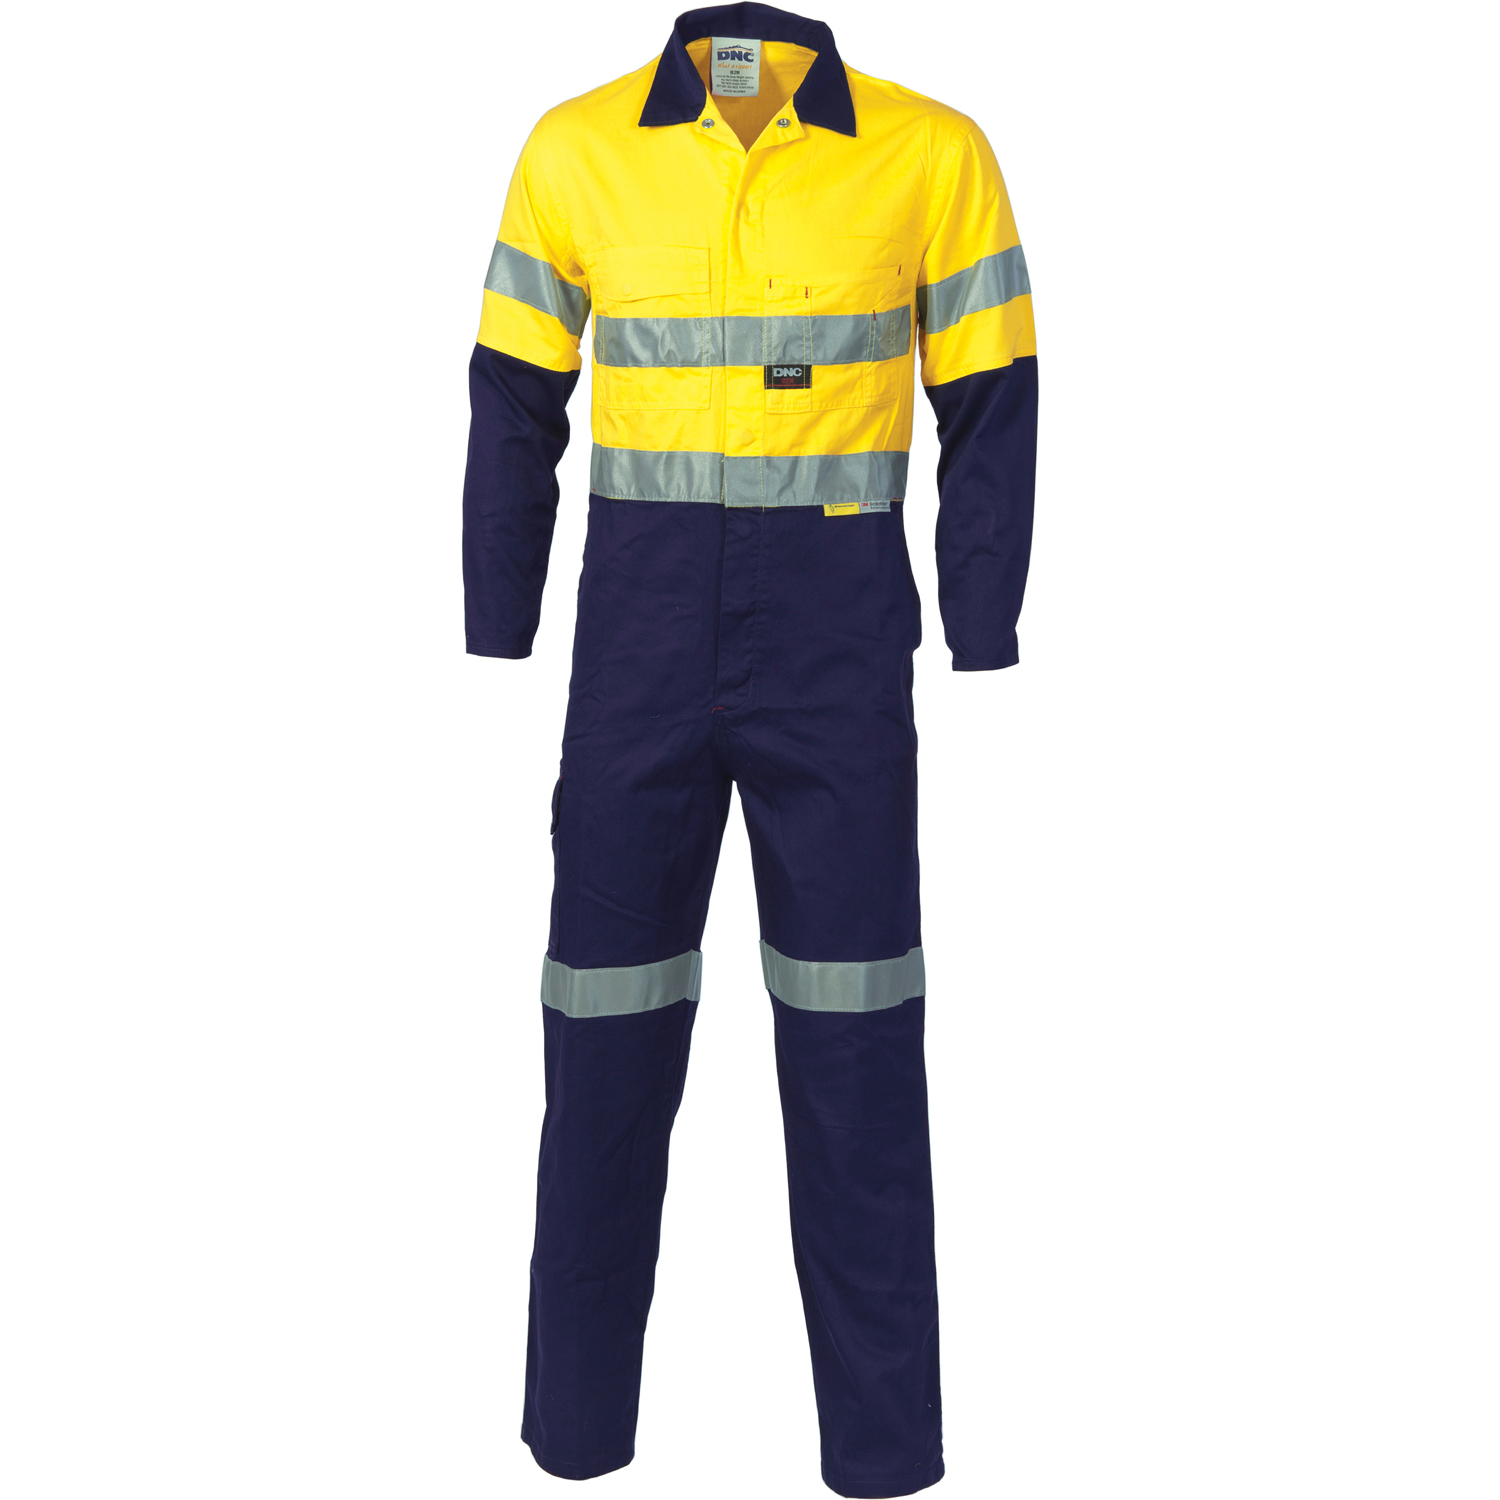 DNC 3855-311gsm HiVis Two Tone Cotton Coverall with 3M R/Tape